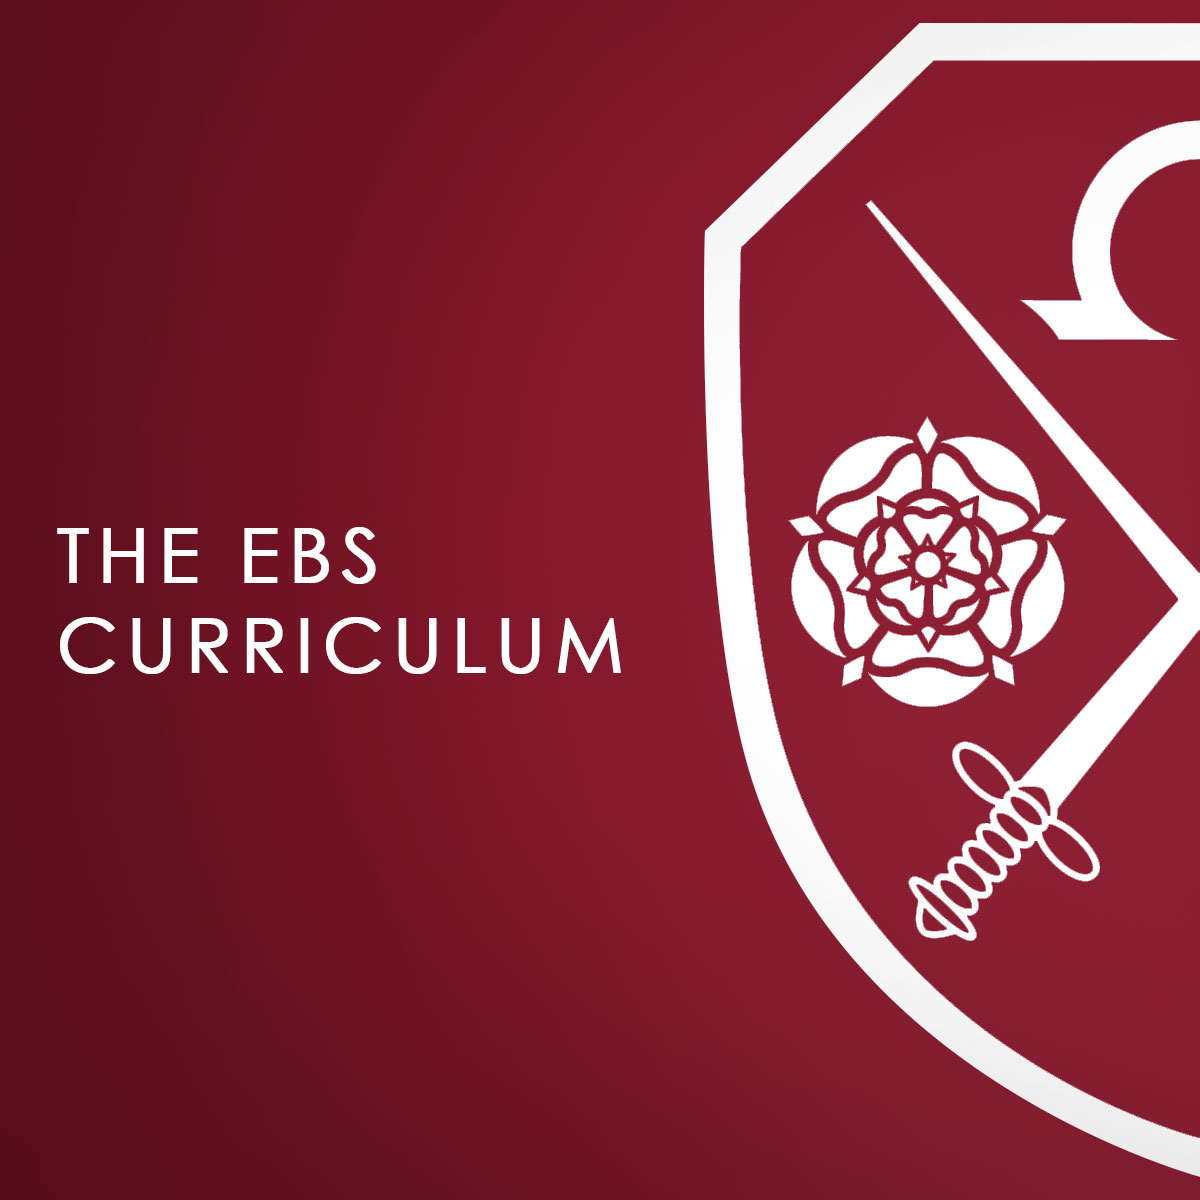 A maroon background with the East Barnet School logo which says The EBS Curriculum